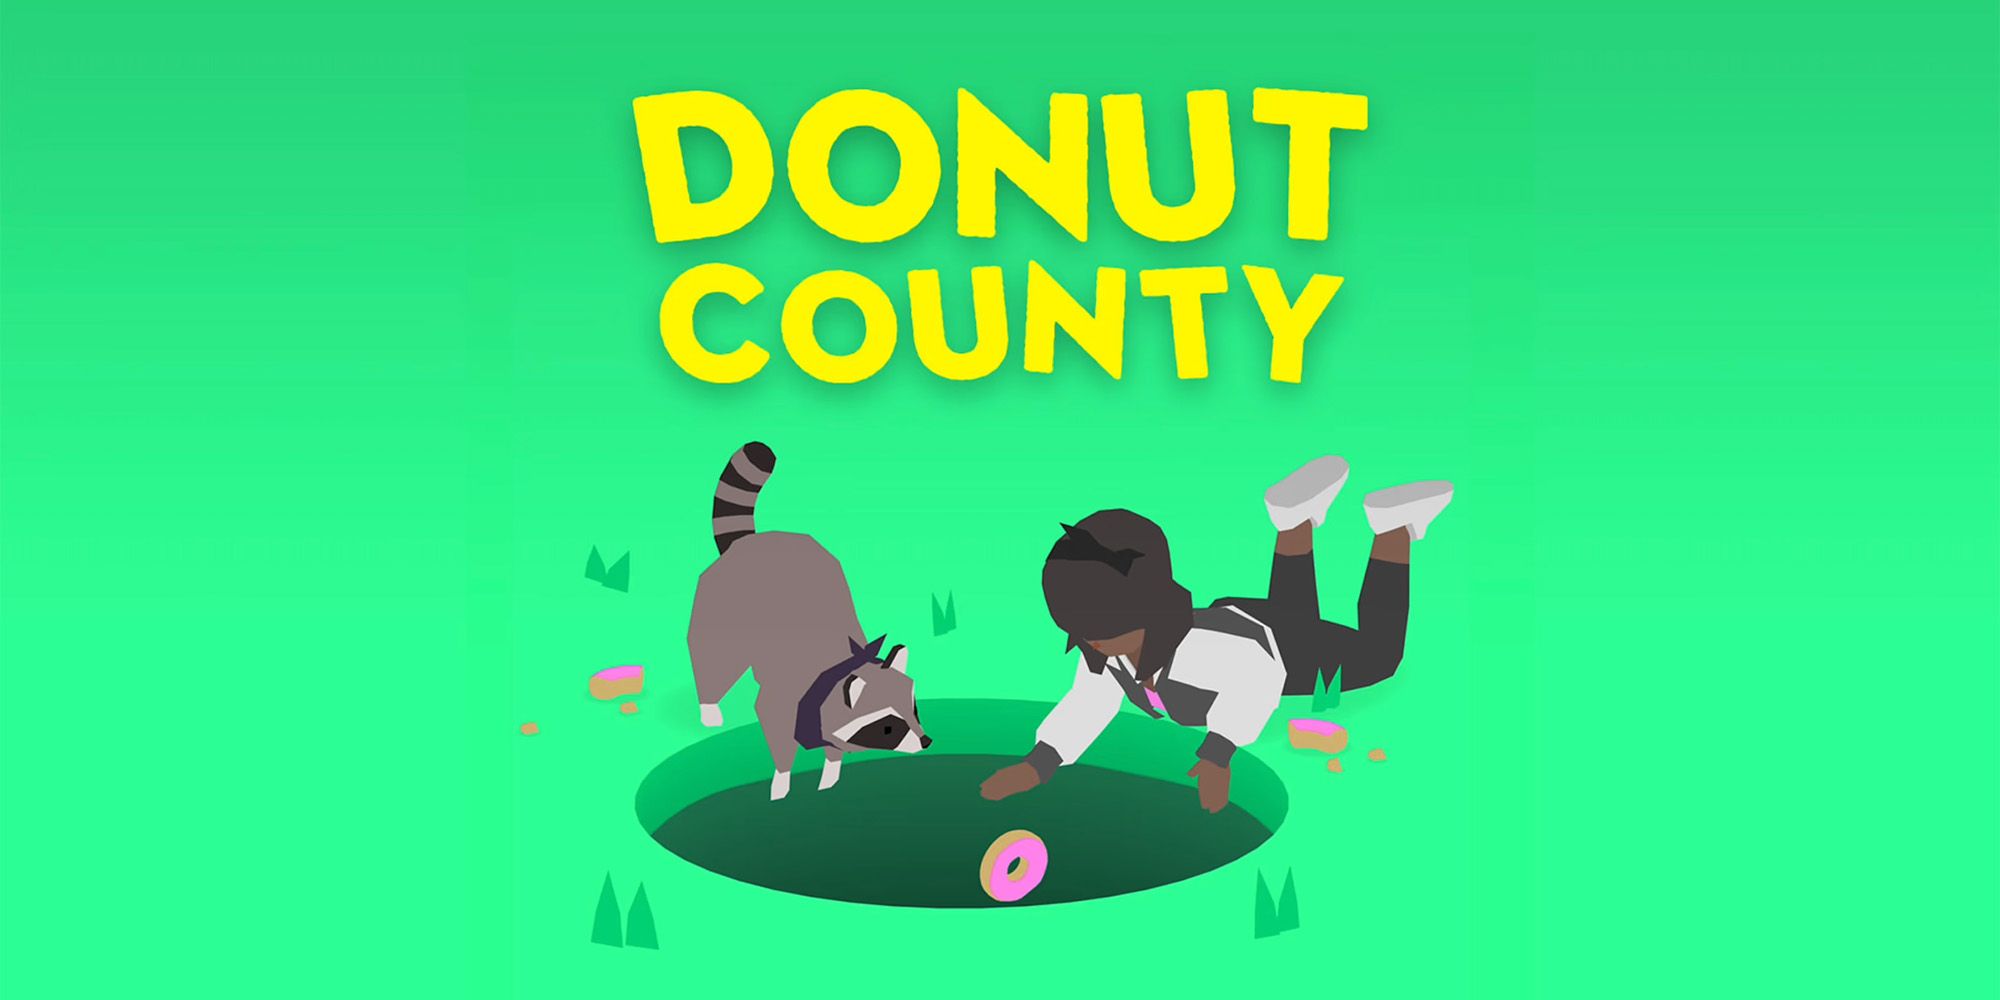 Donut County - A Person And A Raccoon Staring Into A Hole In The Ground